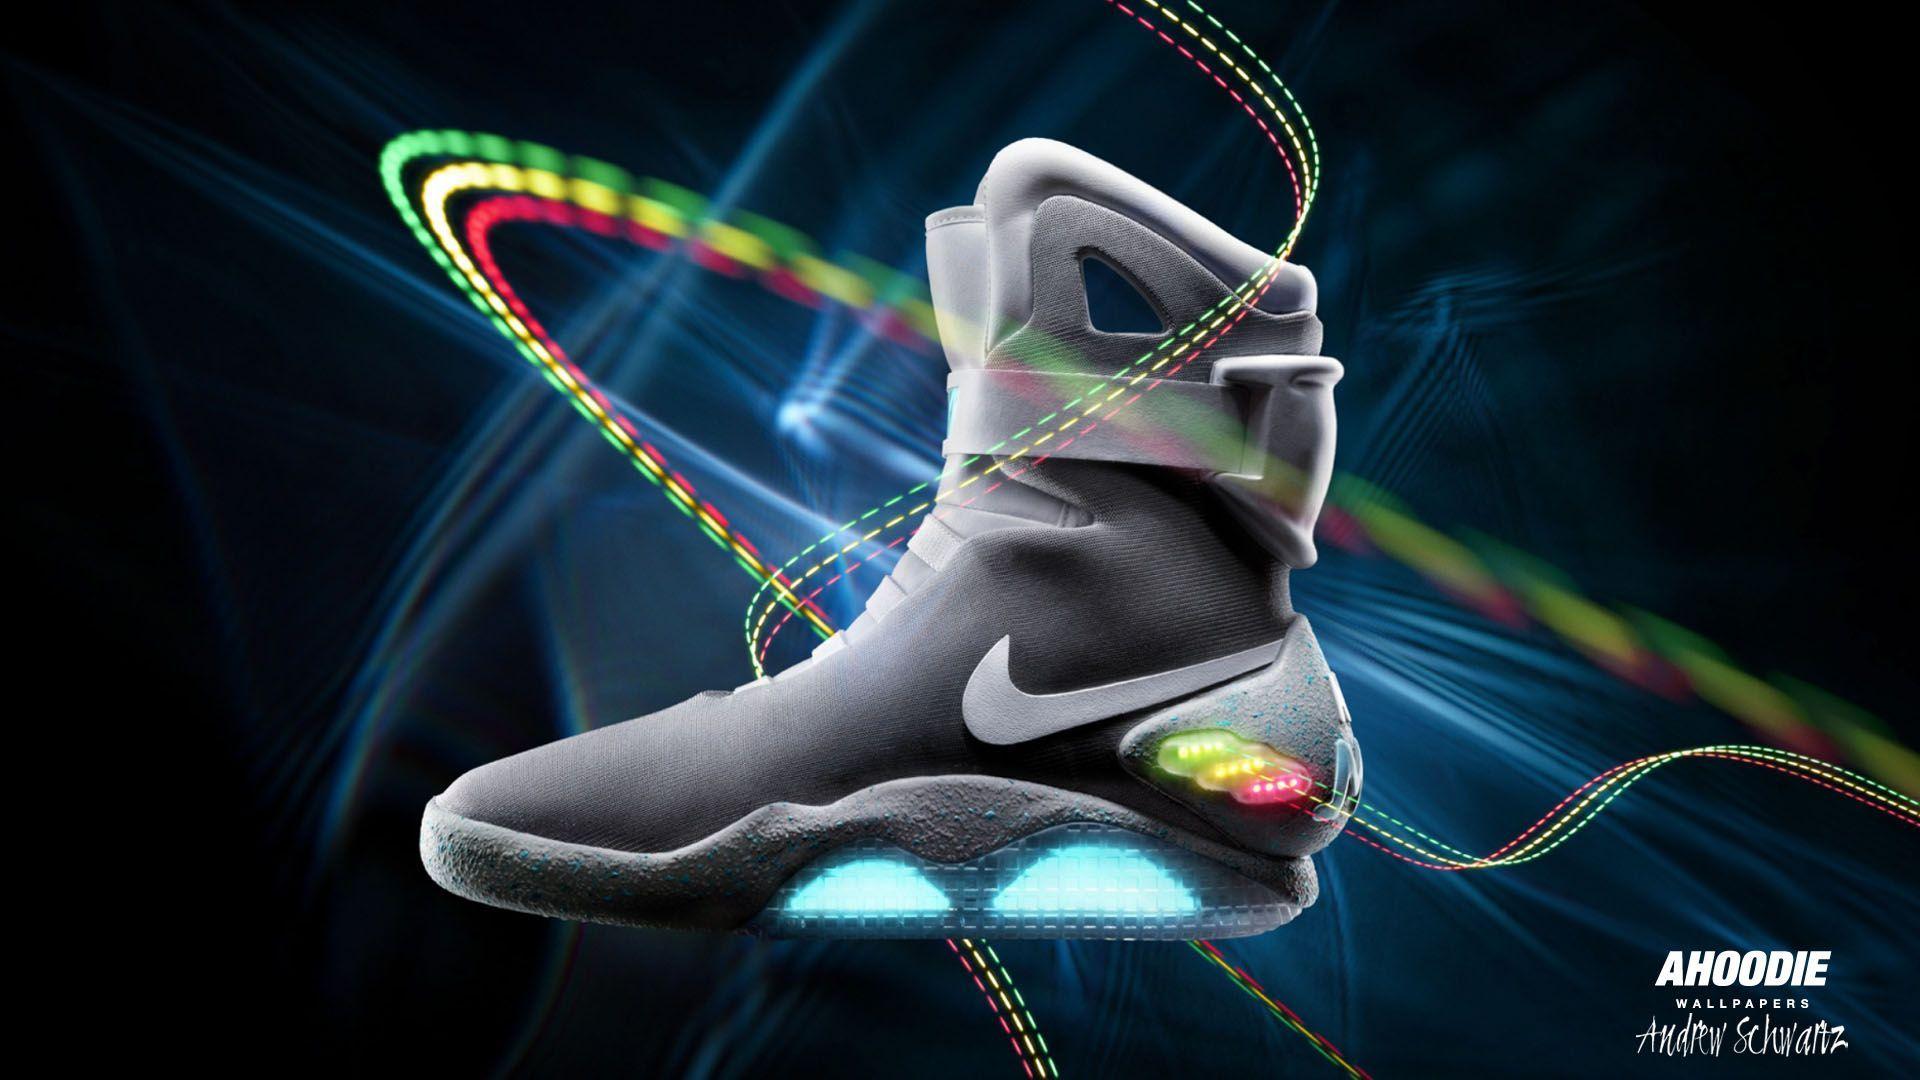 Nike Thumbs Air Mag And Sb Wallpaper # Resolution, 1920x Filesize, 251.52 kB, Added on March 201. Nike mag, Nike air mag, Zurück in die zukunft